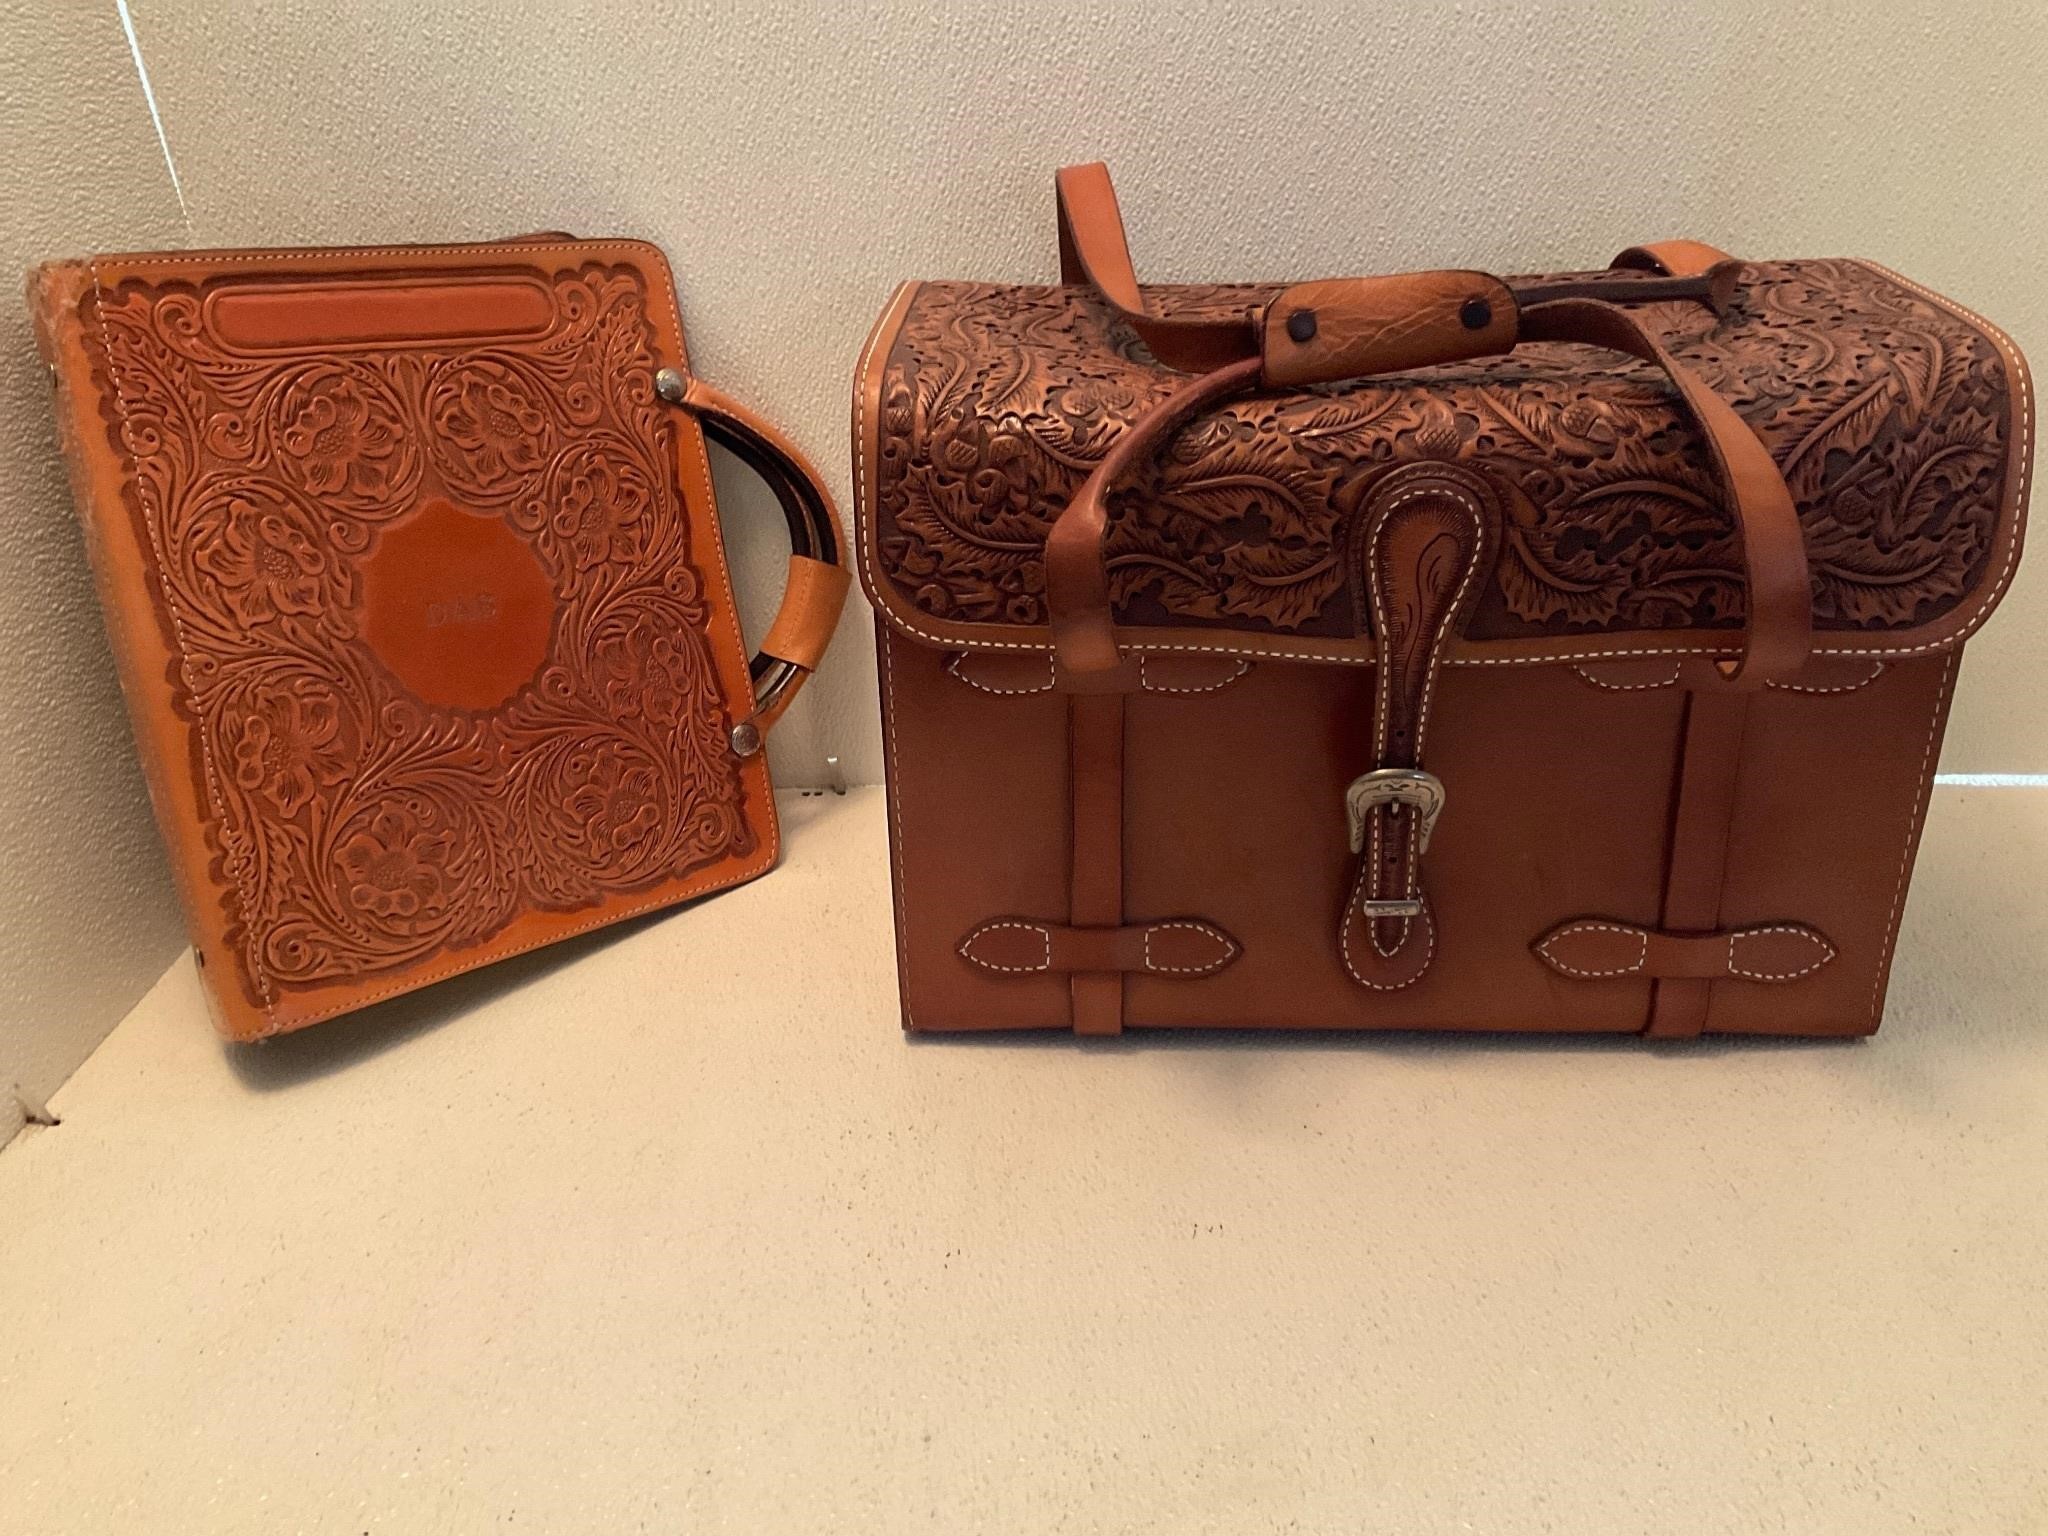 LEATHER BAG AND FOLDER WITH HANDLES